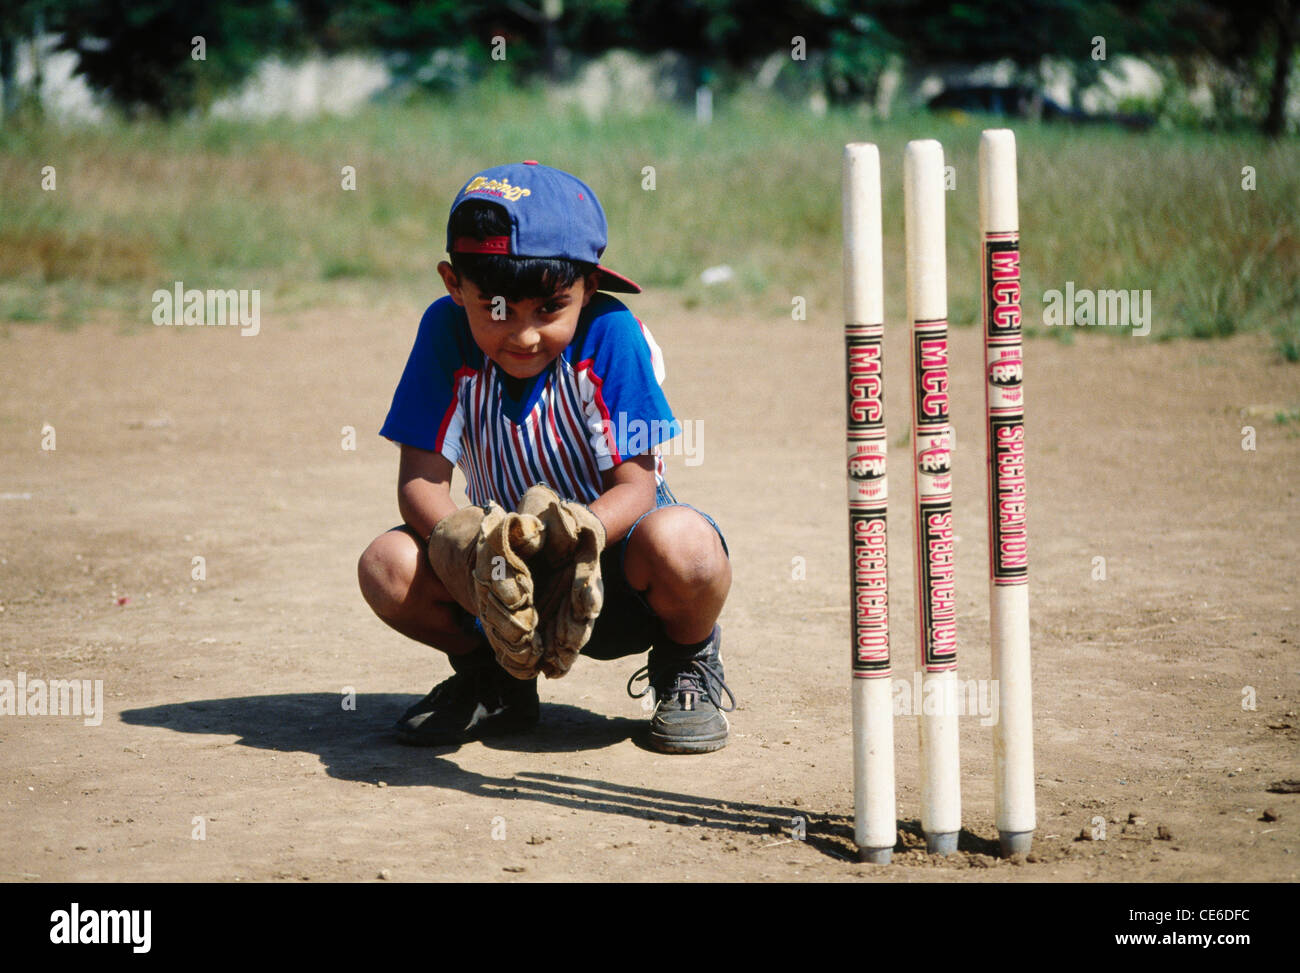 Indian child boy playing cricket doing wicket keeping sitting behind stumps ; India ; Asia ; MR#158 Stock Photo